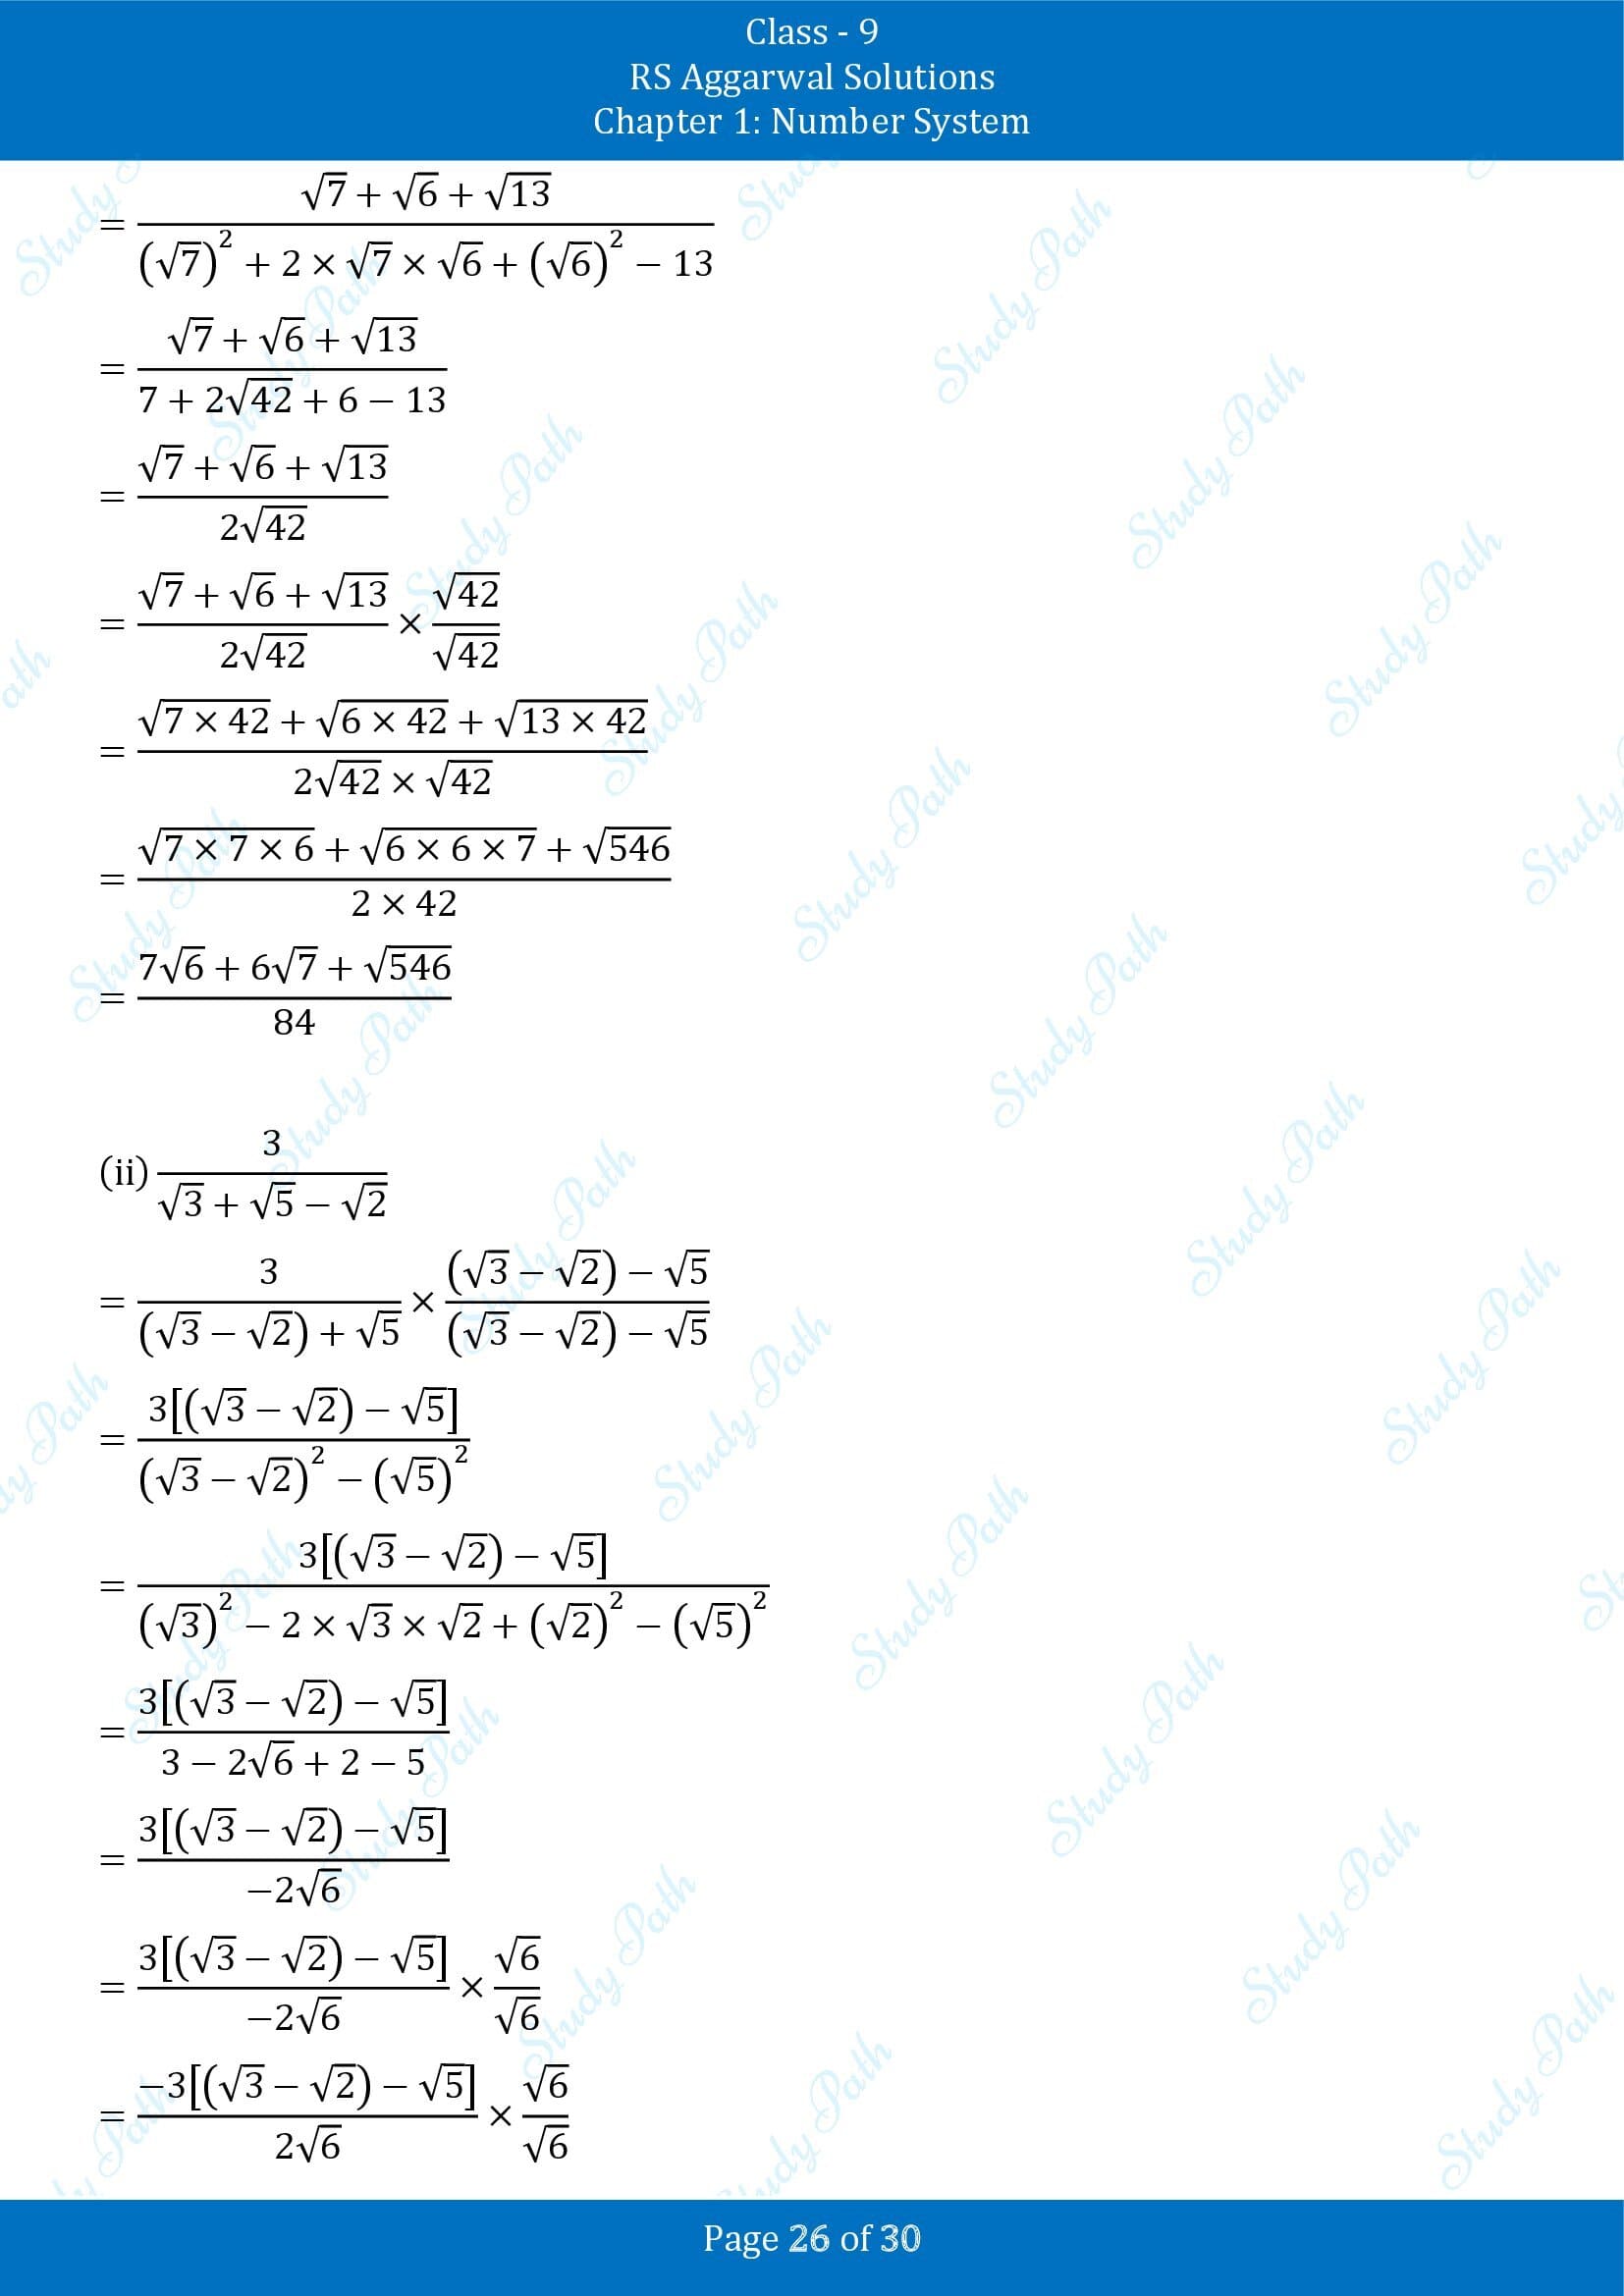 RS Aggarwal Solutions Class 9 Chapter 1 Number System Exercise 1F 00026